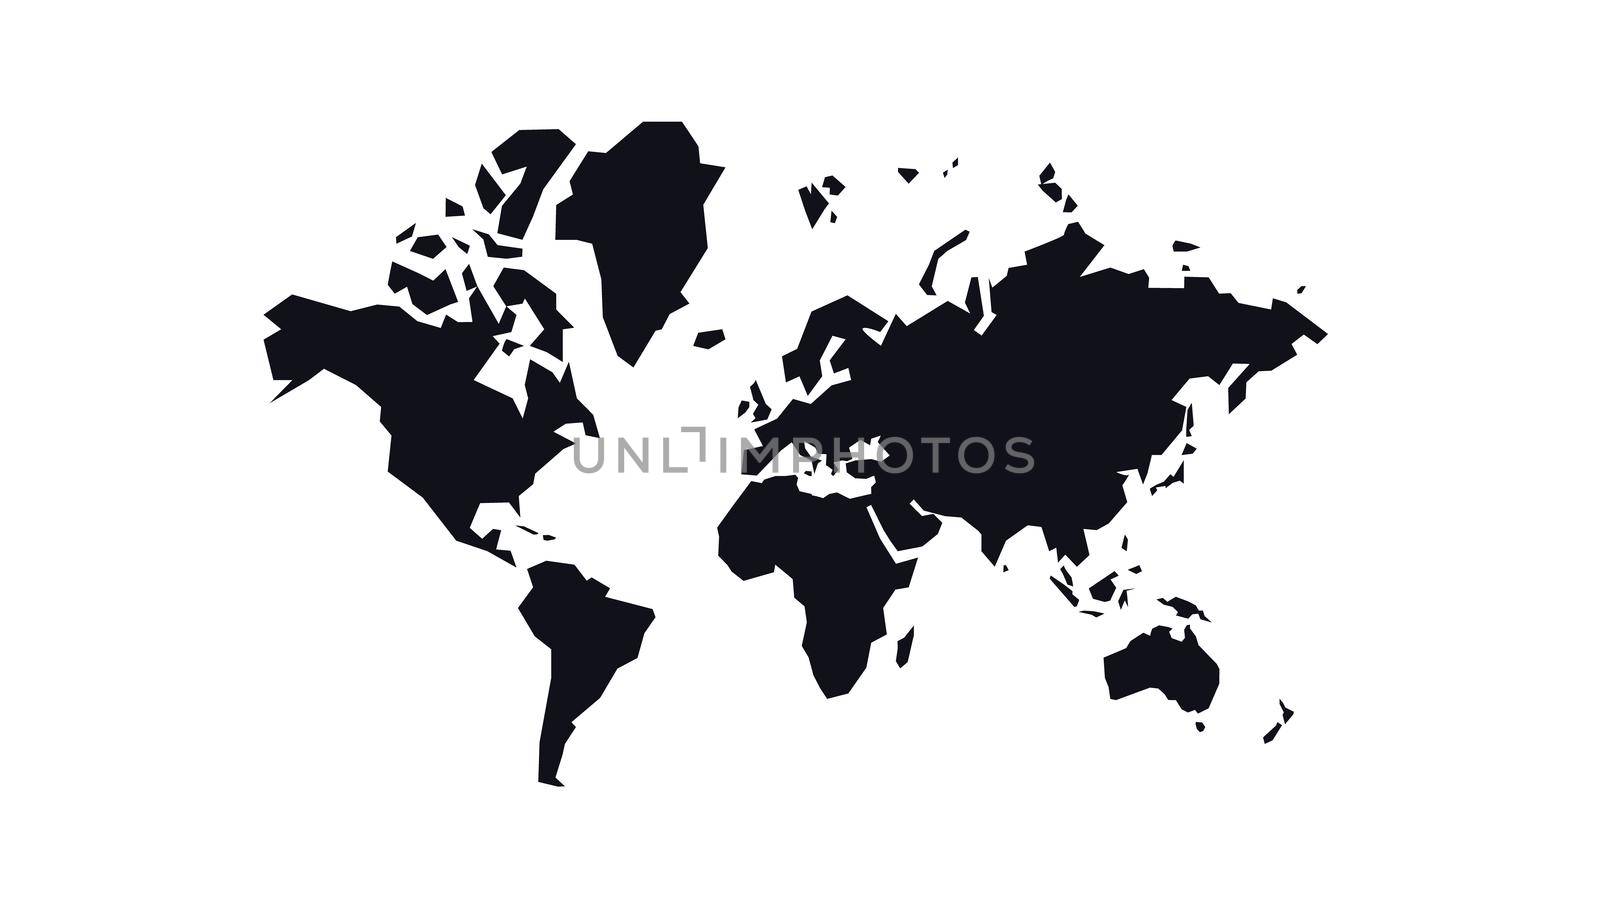 Abstract Geometric World Map. Isolated Vector Template. Abstract Black Isolated Continent Silhouettes On White Background.